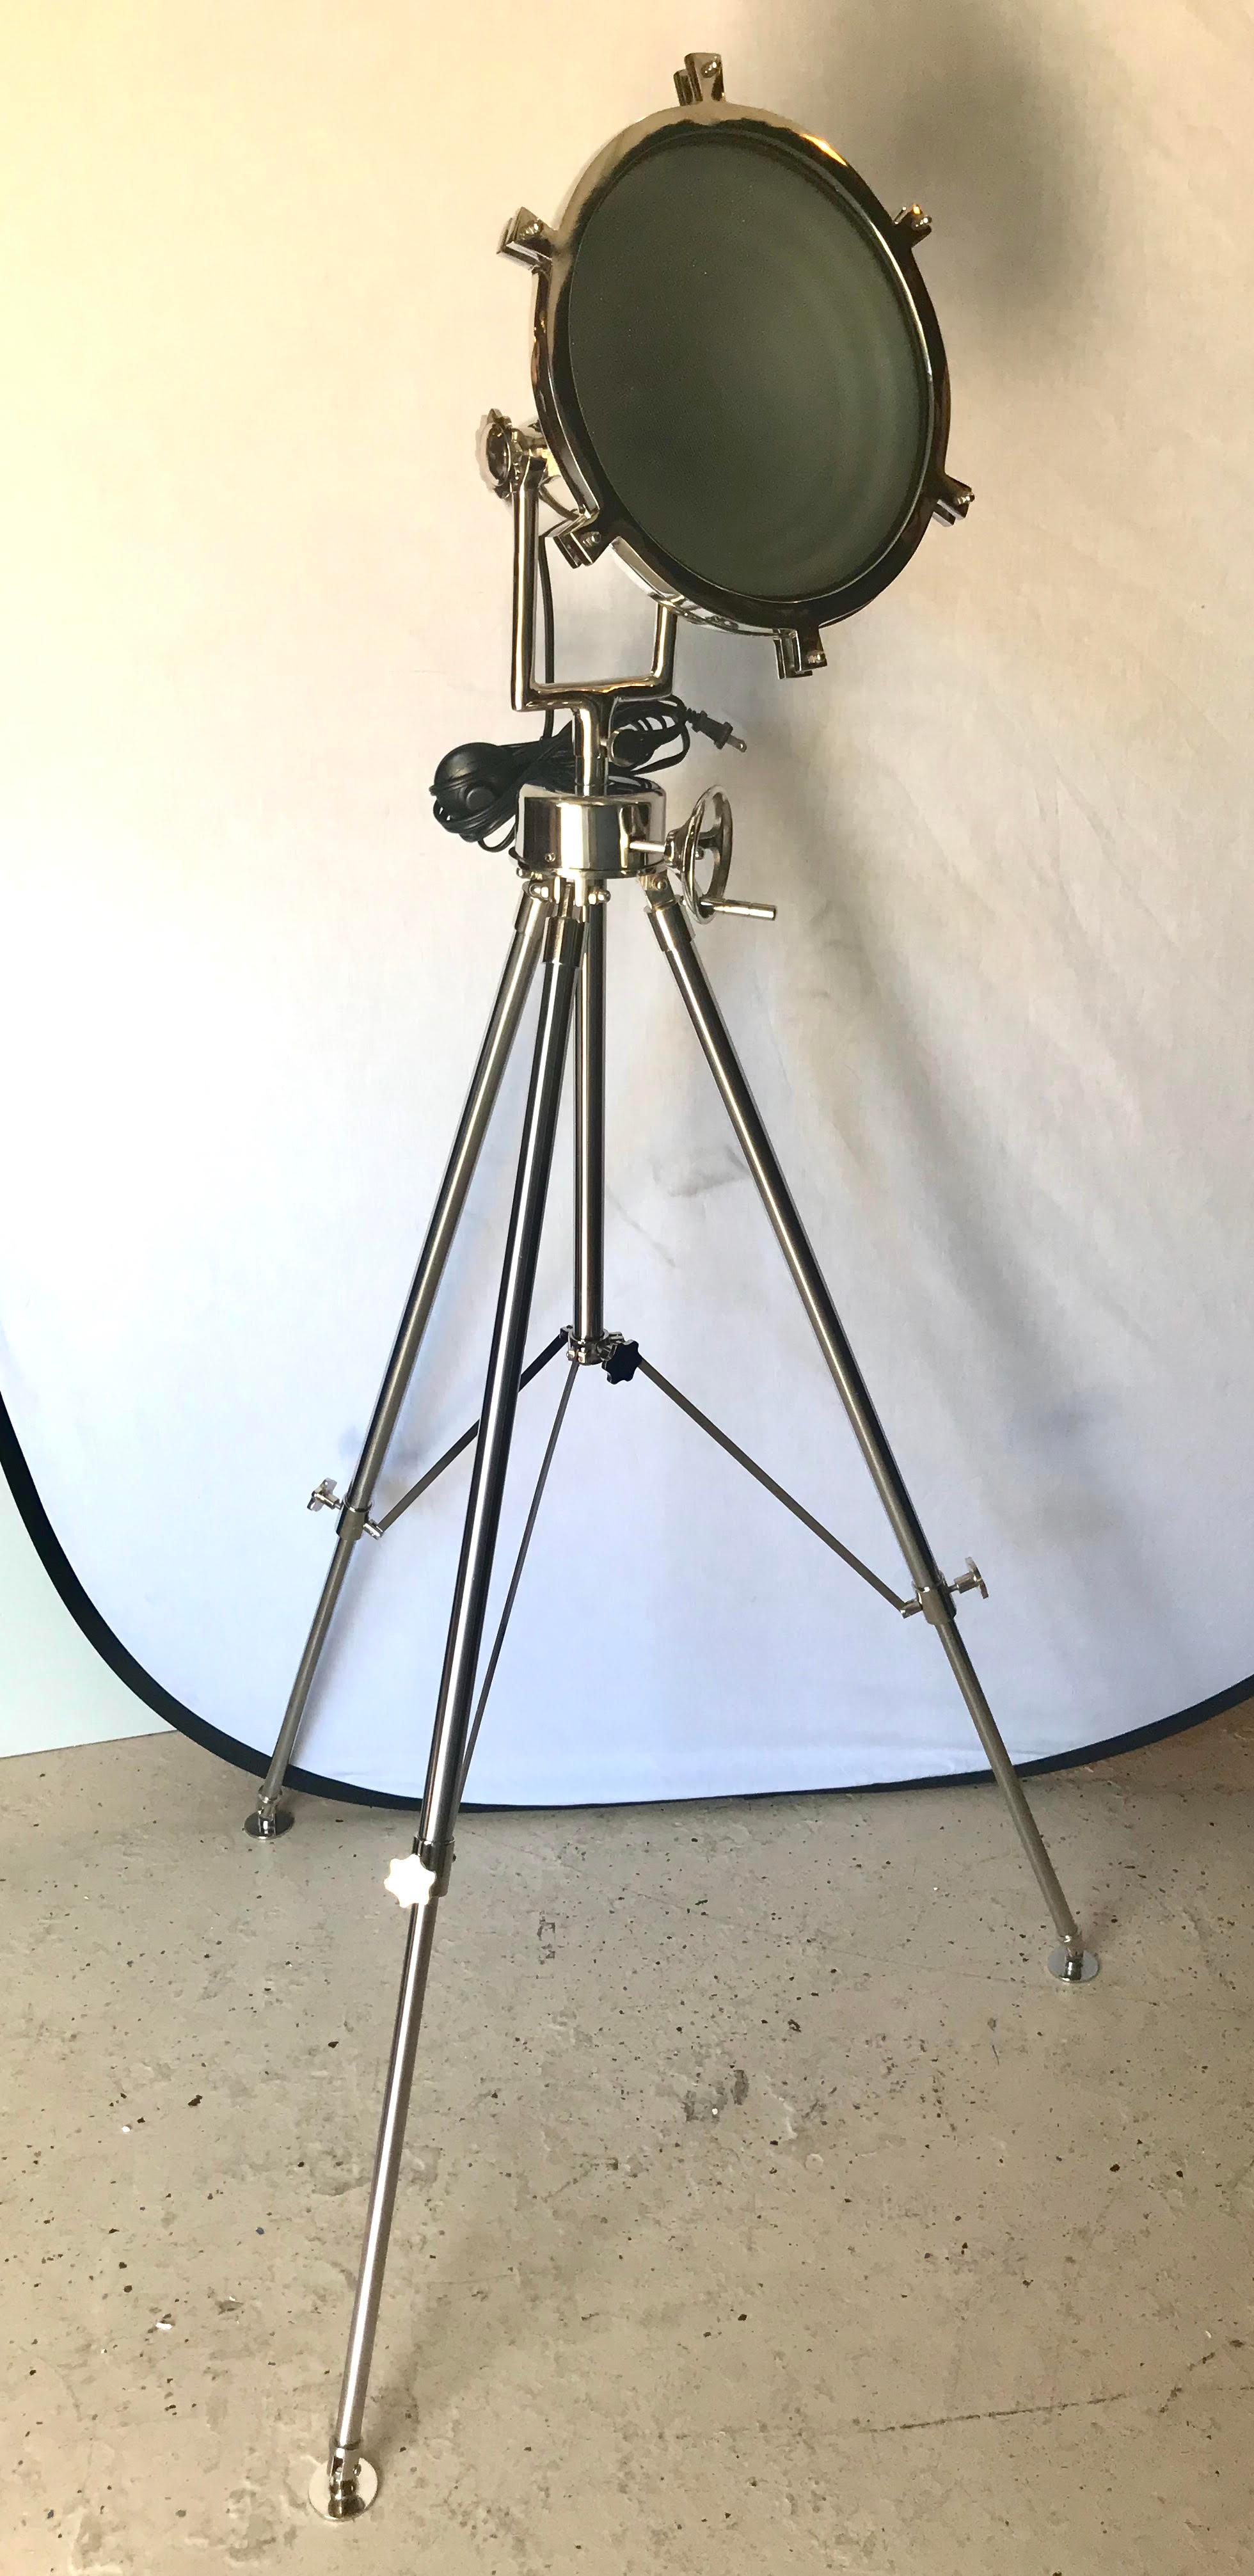 Hollywood Regency style Industrial chrome spotlight floor lamps with chrome tripod stand. Lamp dimensions: 4